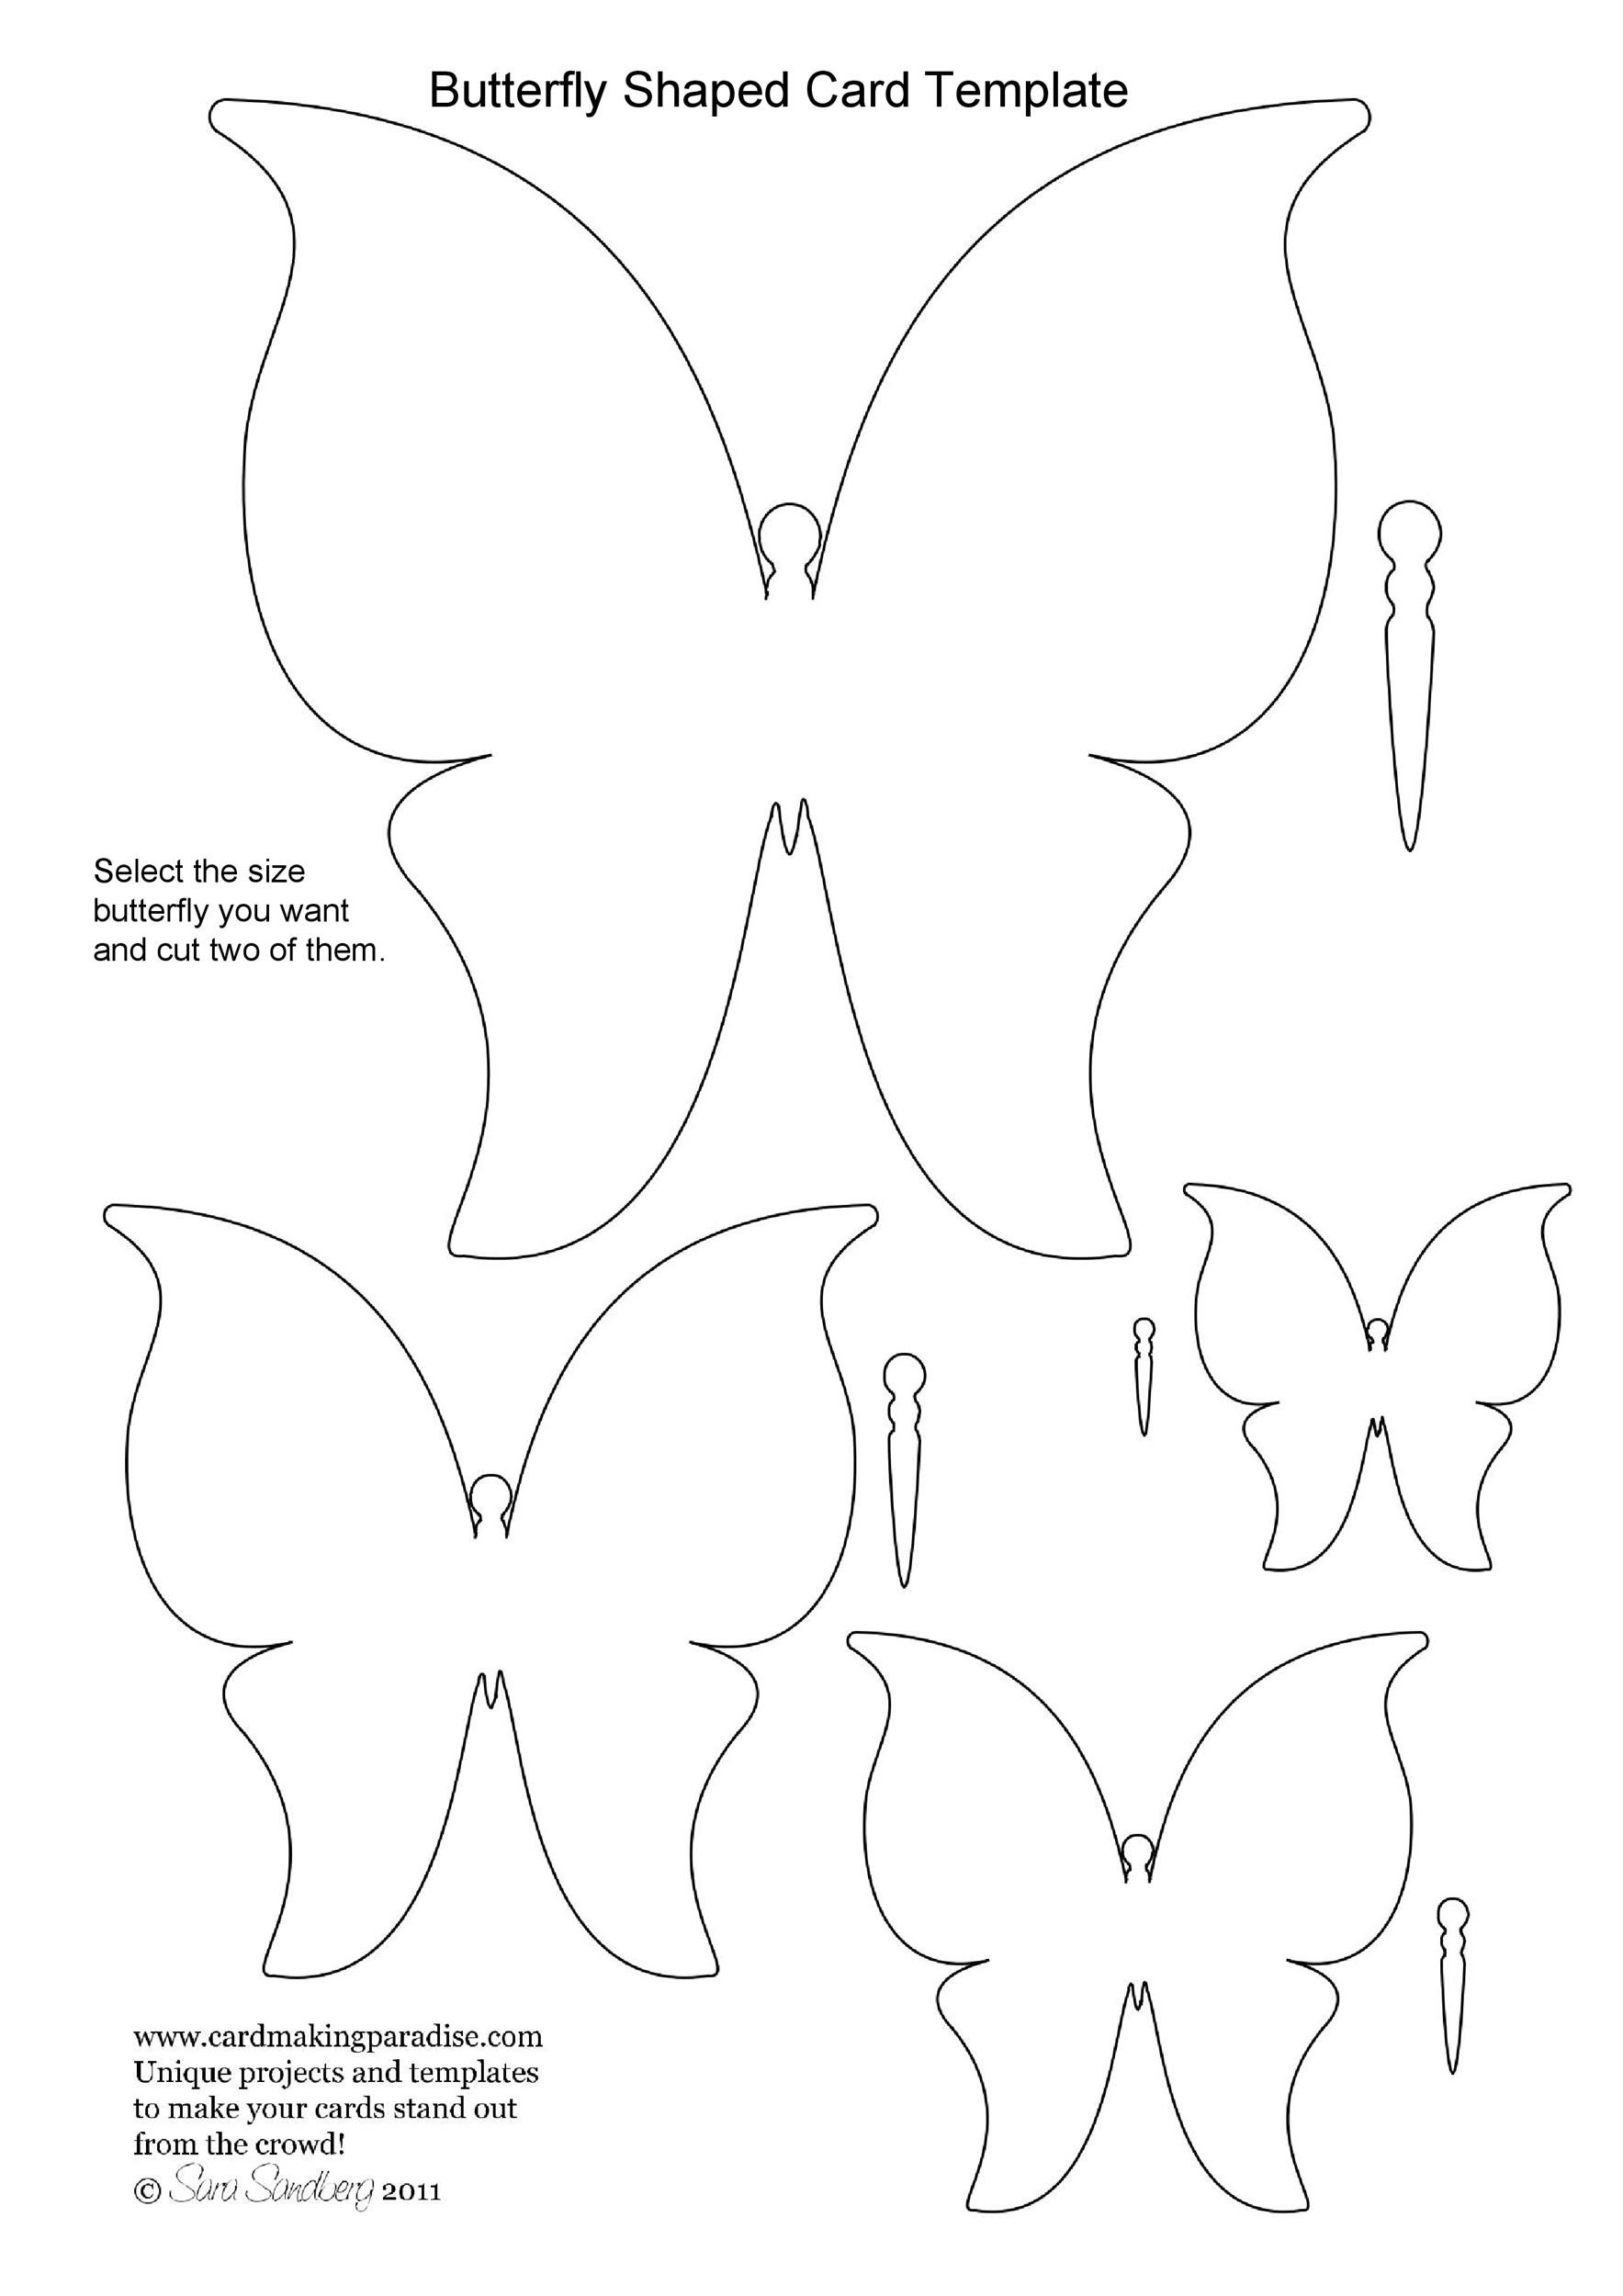 cut-out-printable-butterfly-template-printable-templates-free